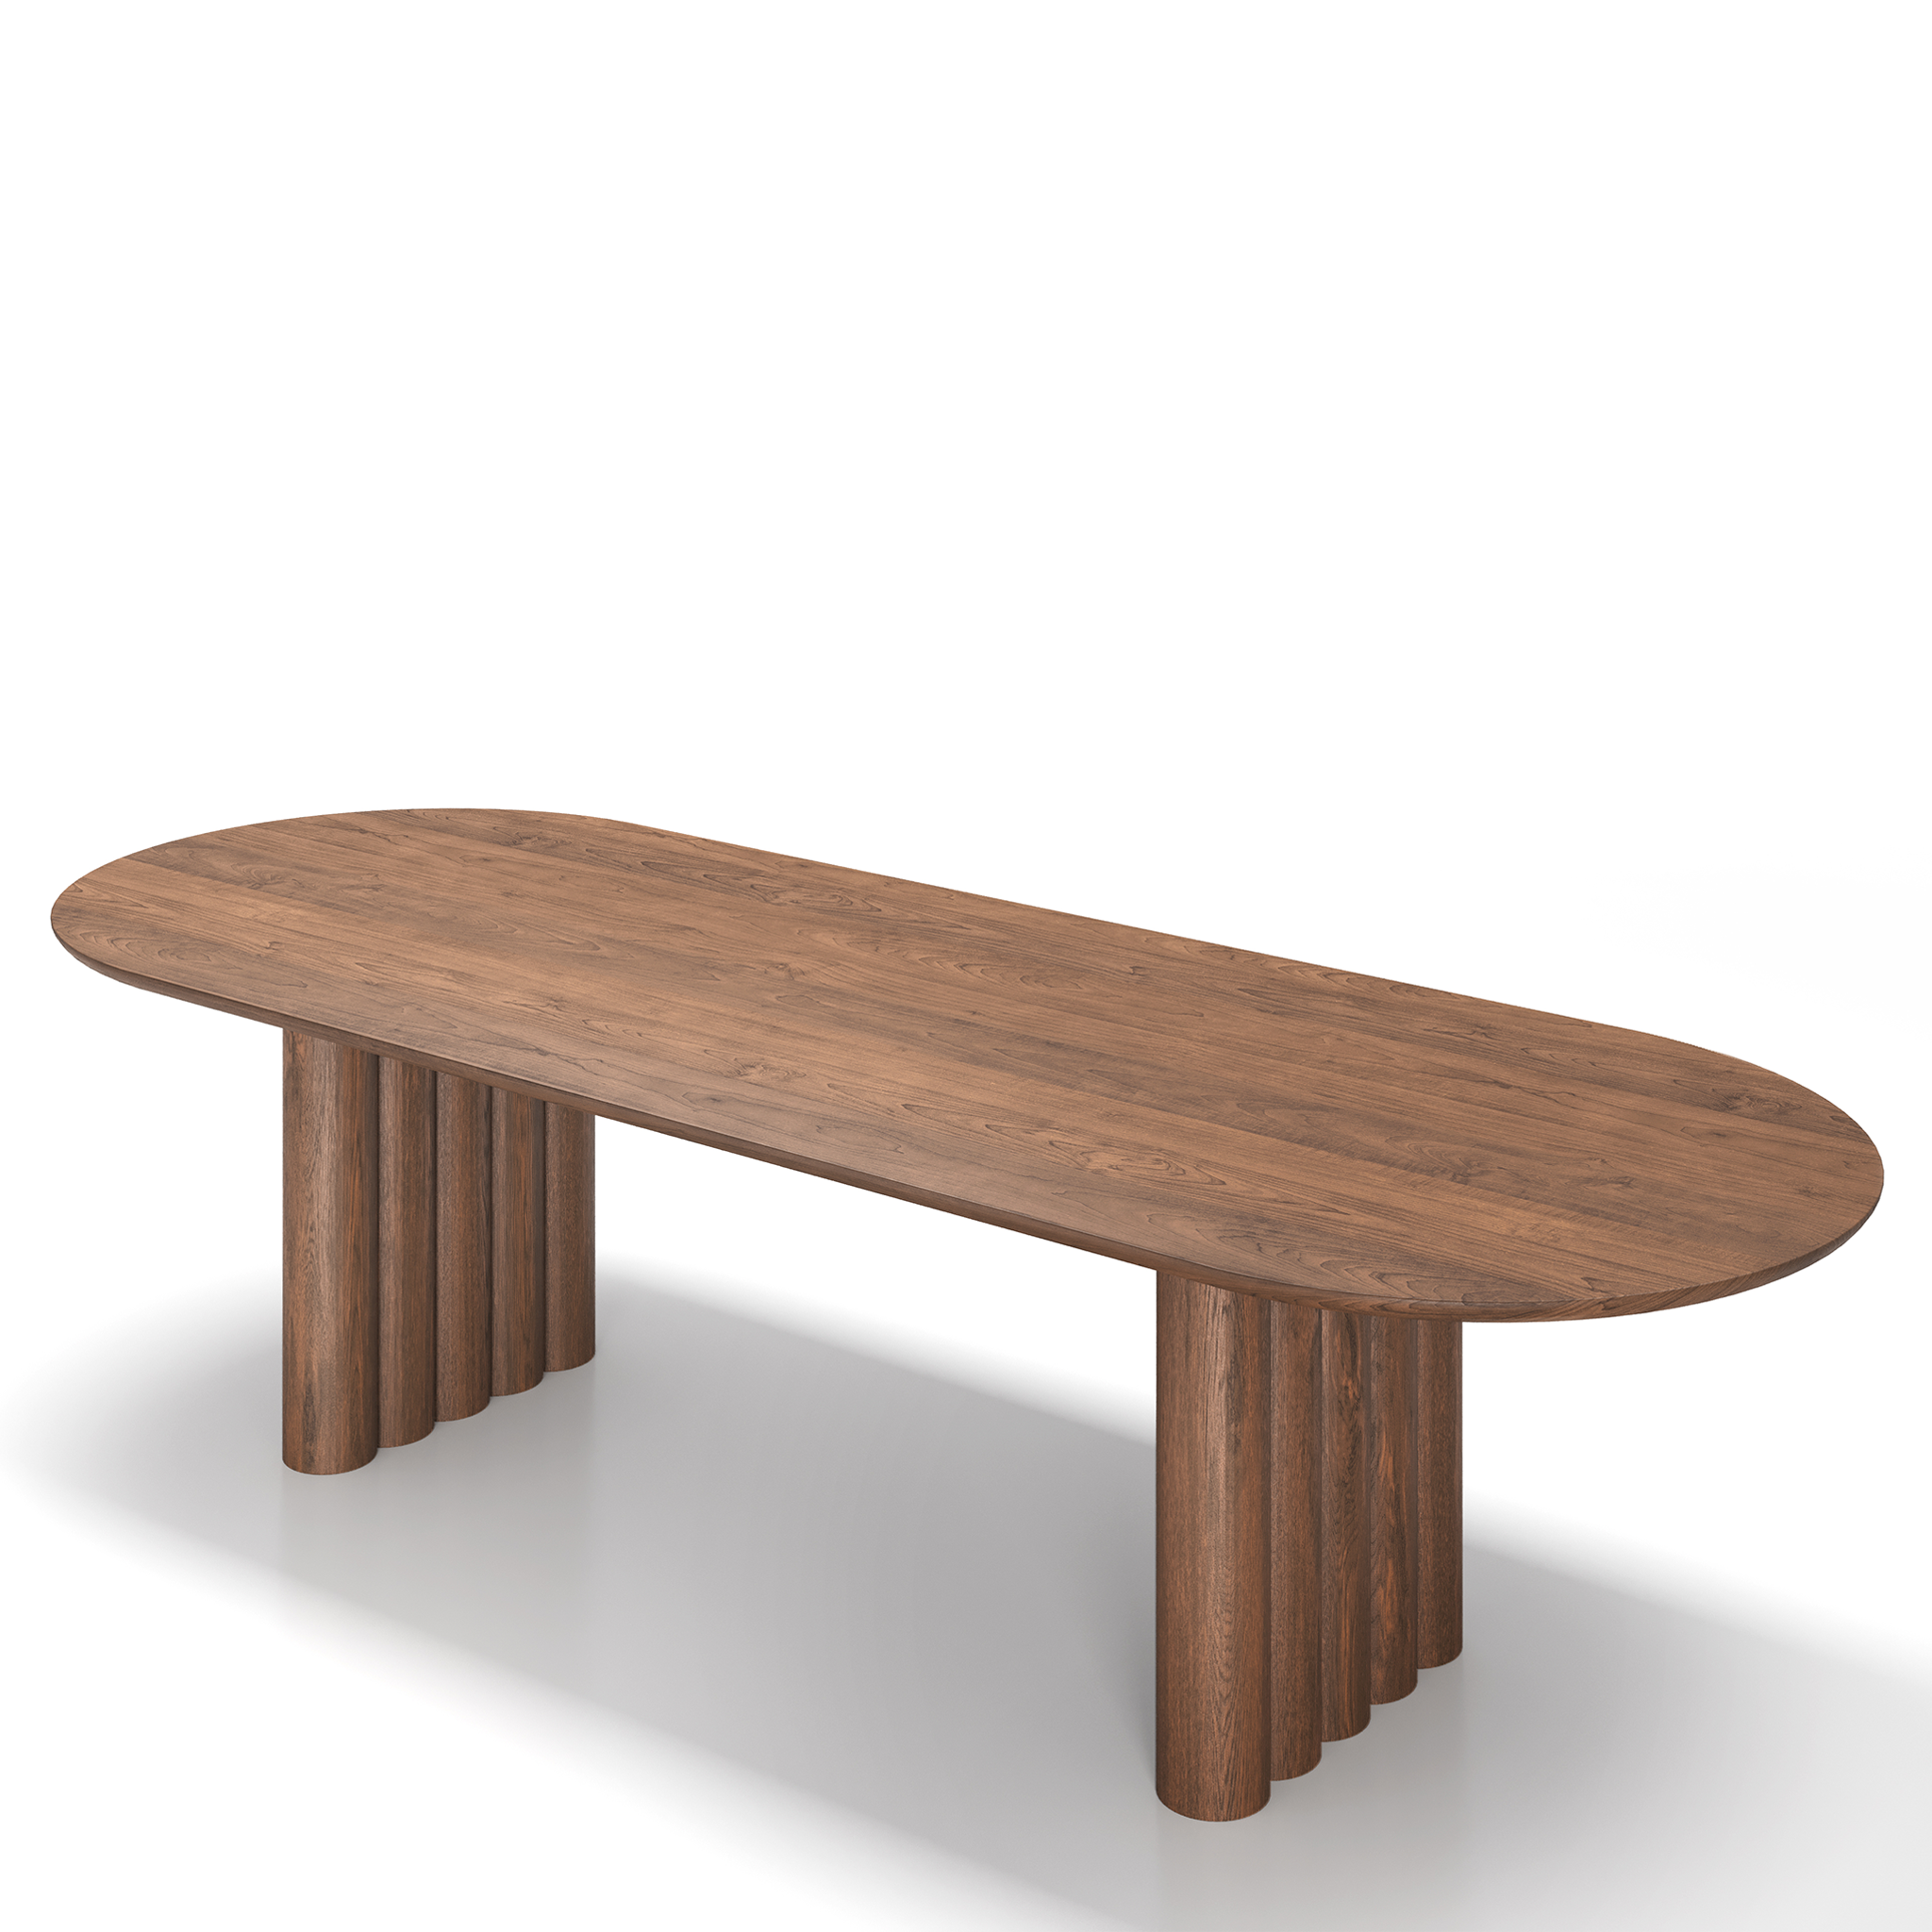 Plush Table Oval by Jacob Plejdrup for DK3